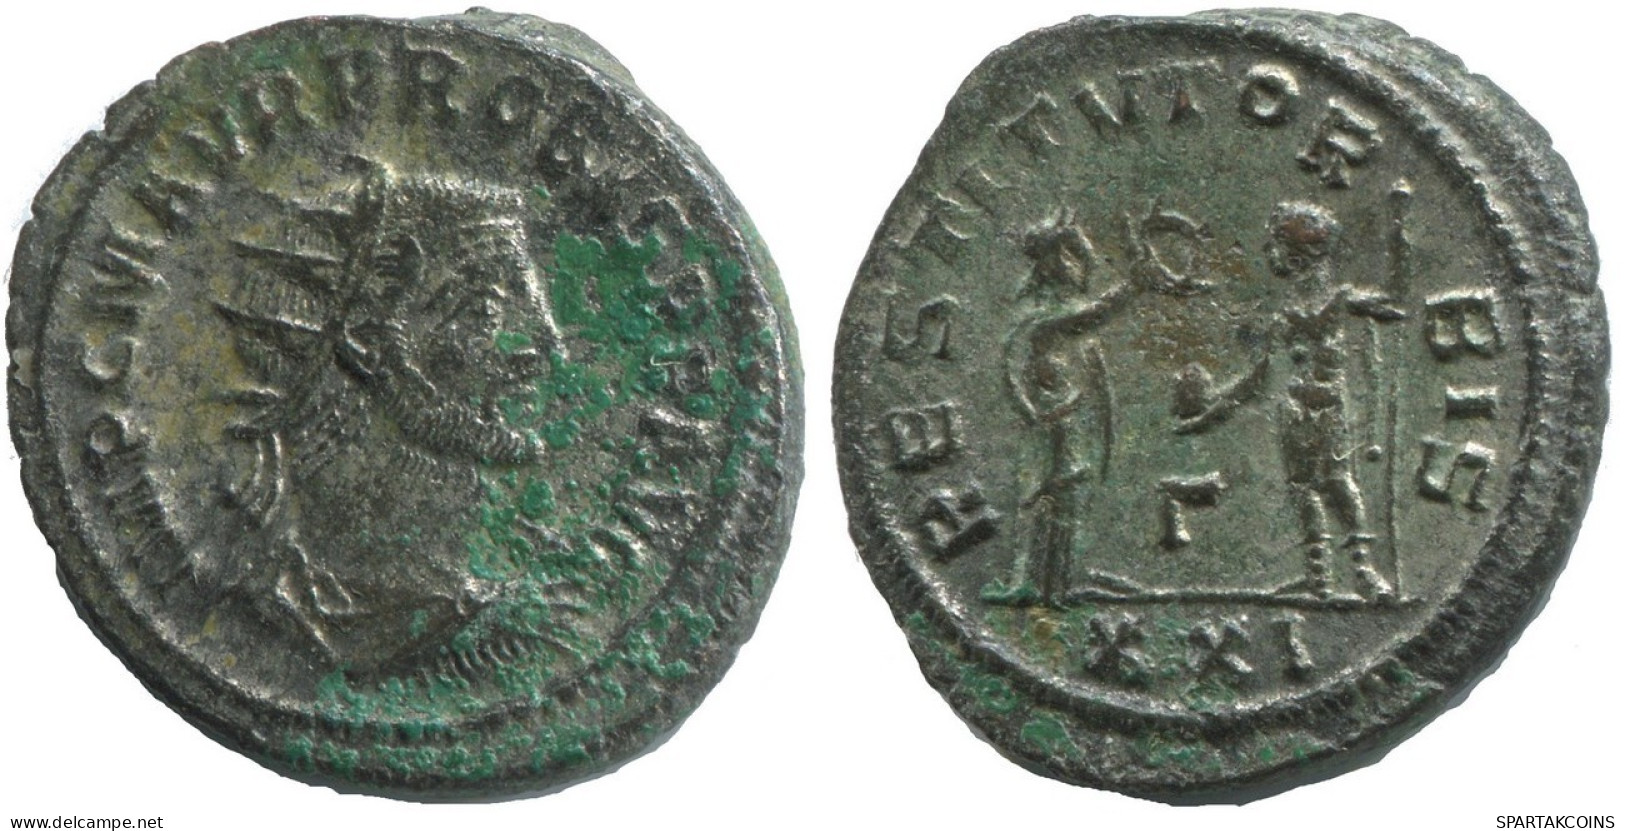 PROBUS ANTIOCH Г XXI AD276-282 SILVERED LATE ROMAN Moneda 4.3g/23mm #ANT2693.41.E.A - The Military Crisis (235 AD To 284 AD)